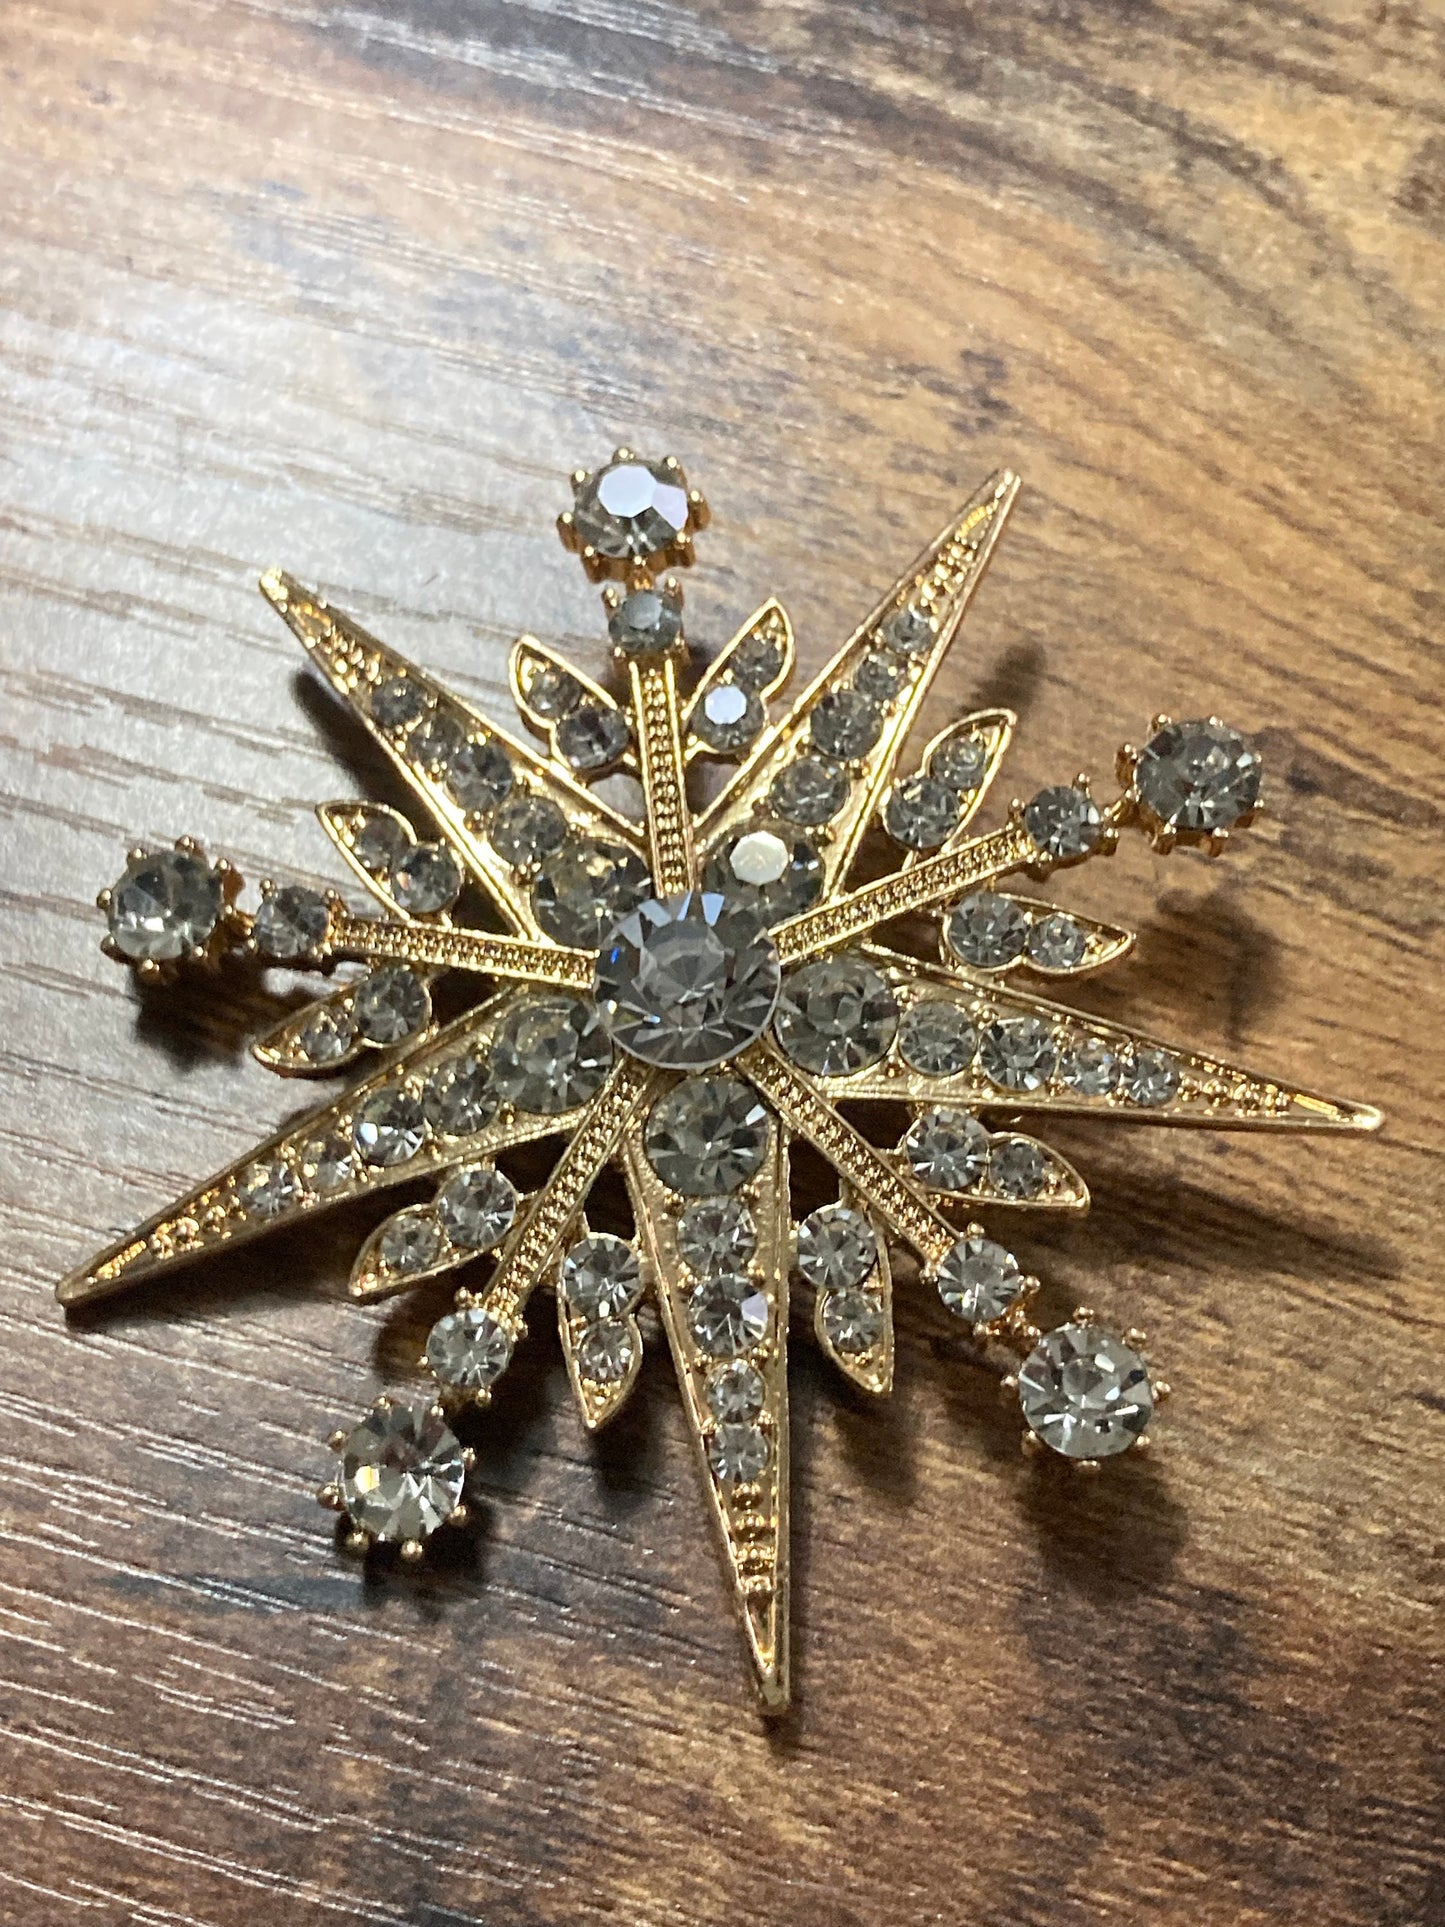 Large clear Crystal diamanté star brooch Victorian Style retro gold tone